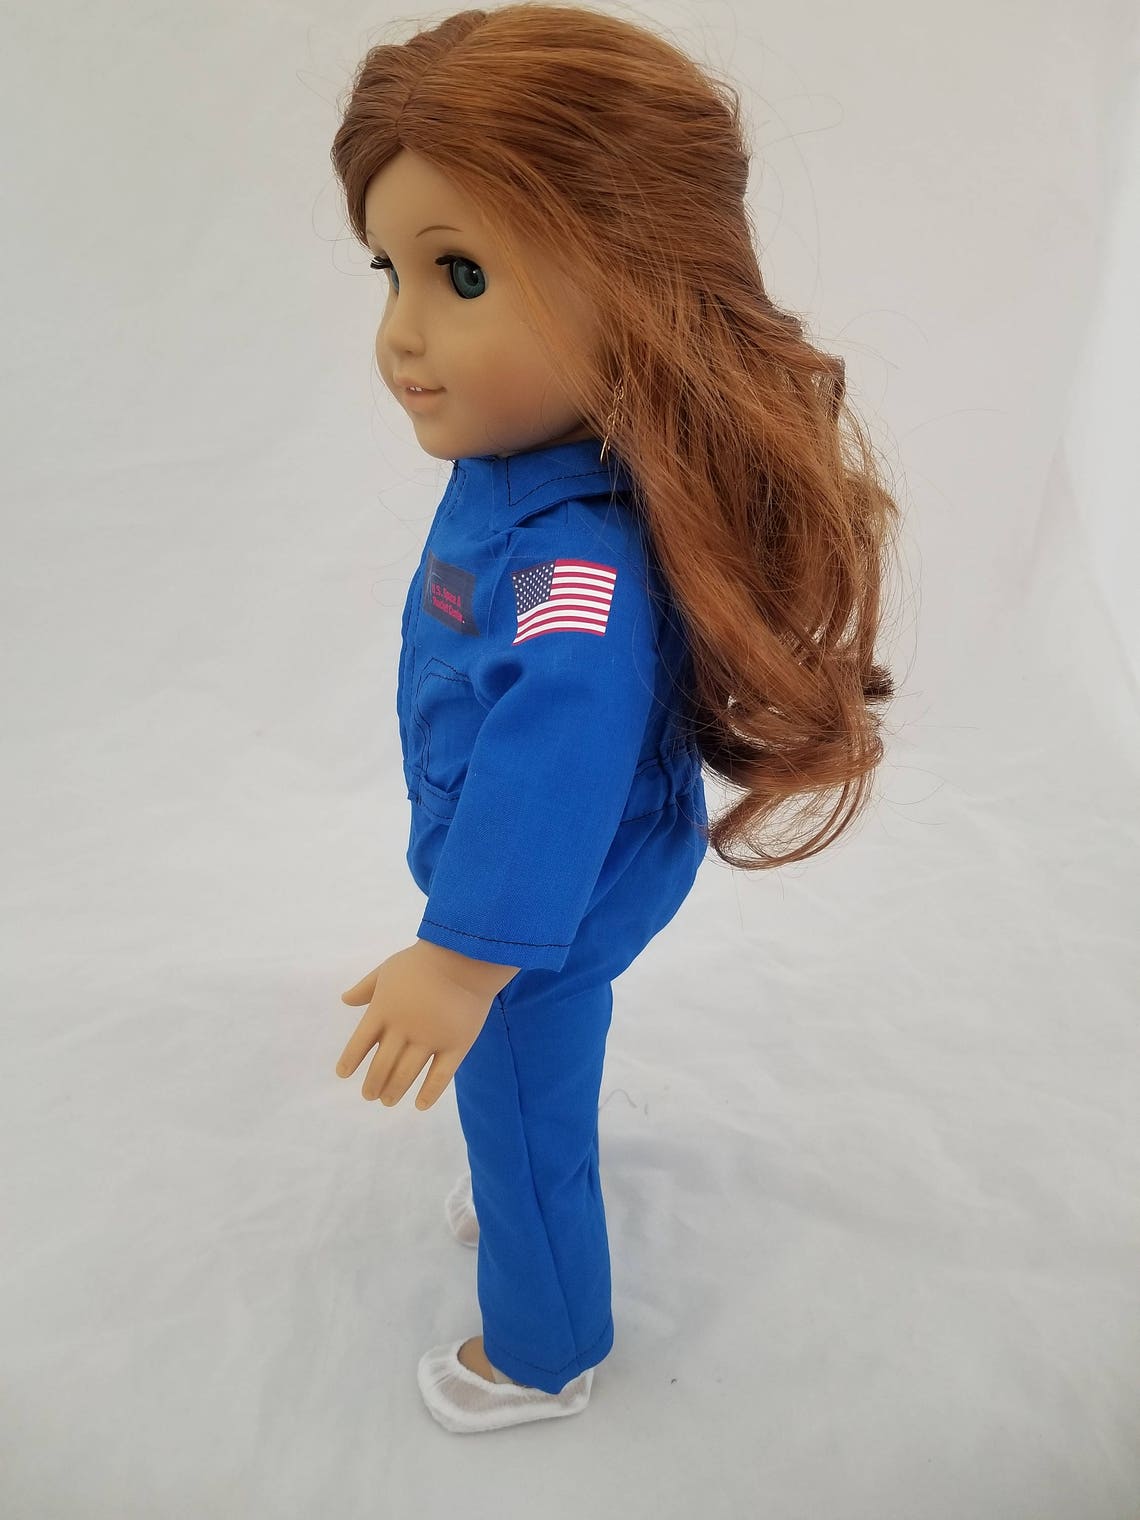 Space Flight Suit for 18 inch Doll | Etsy